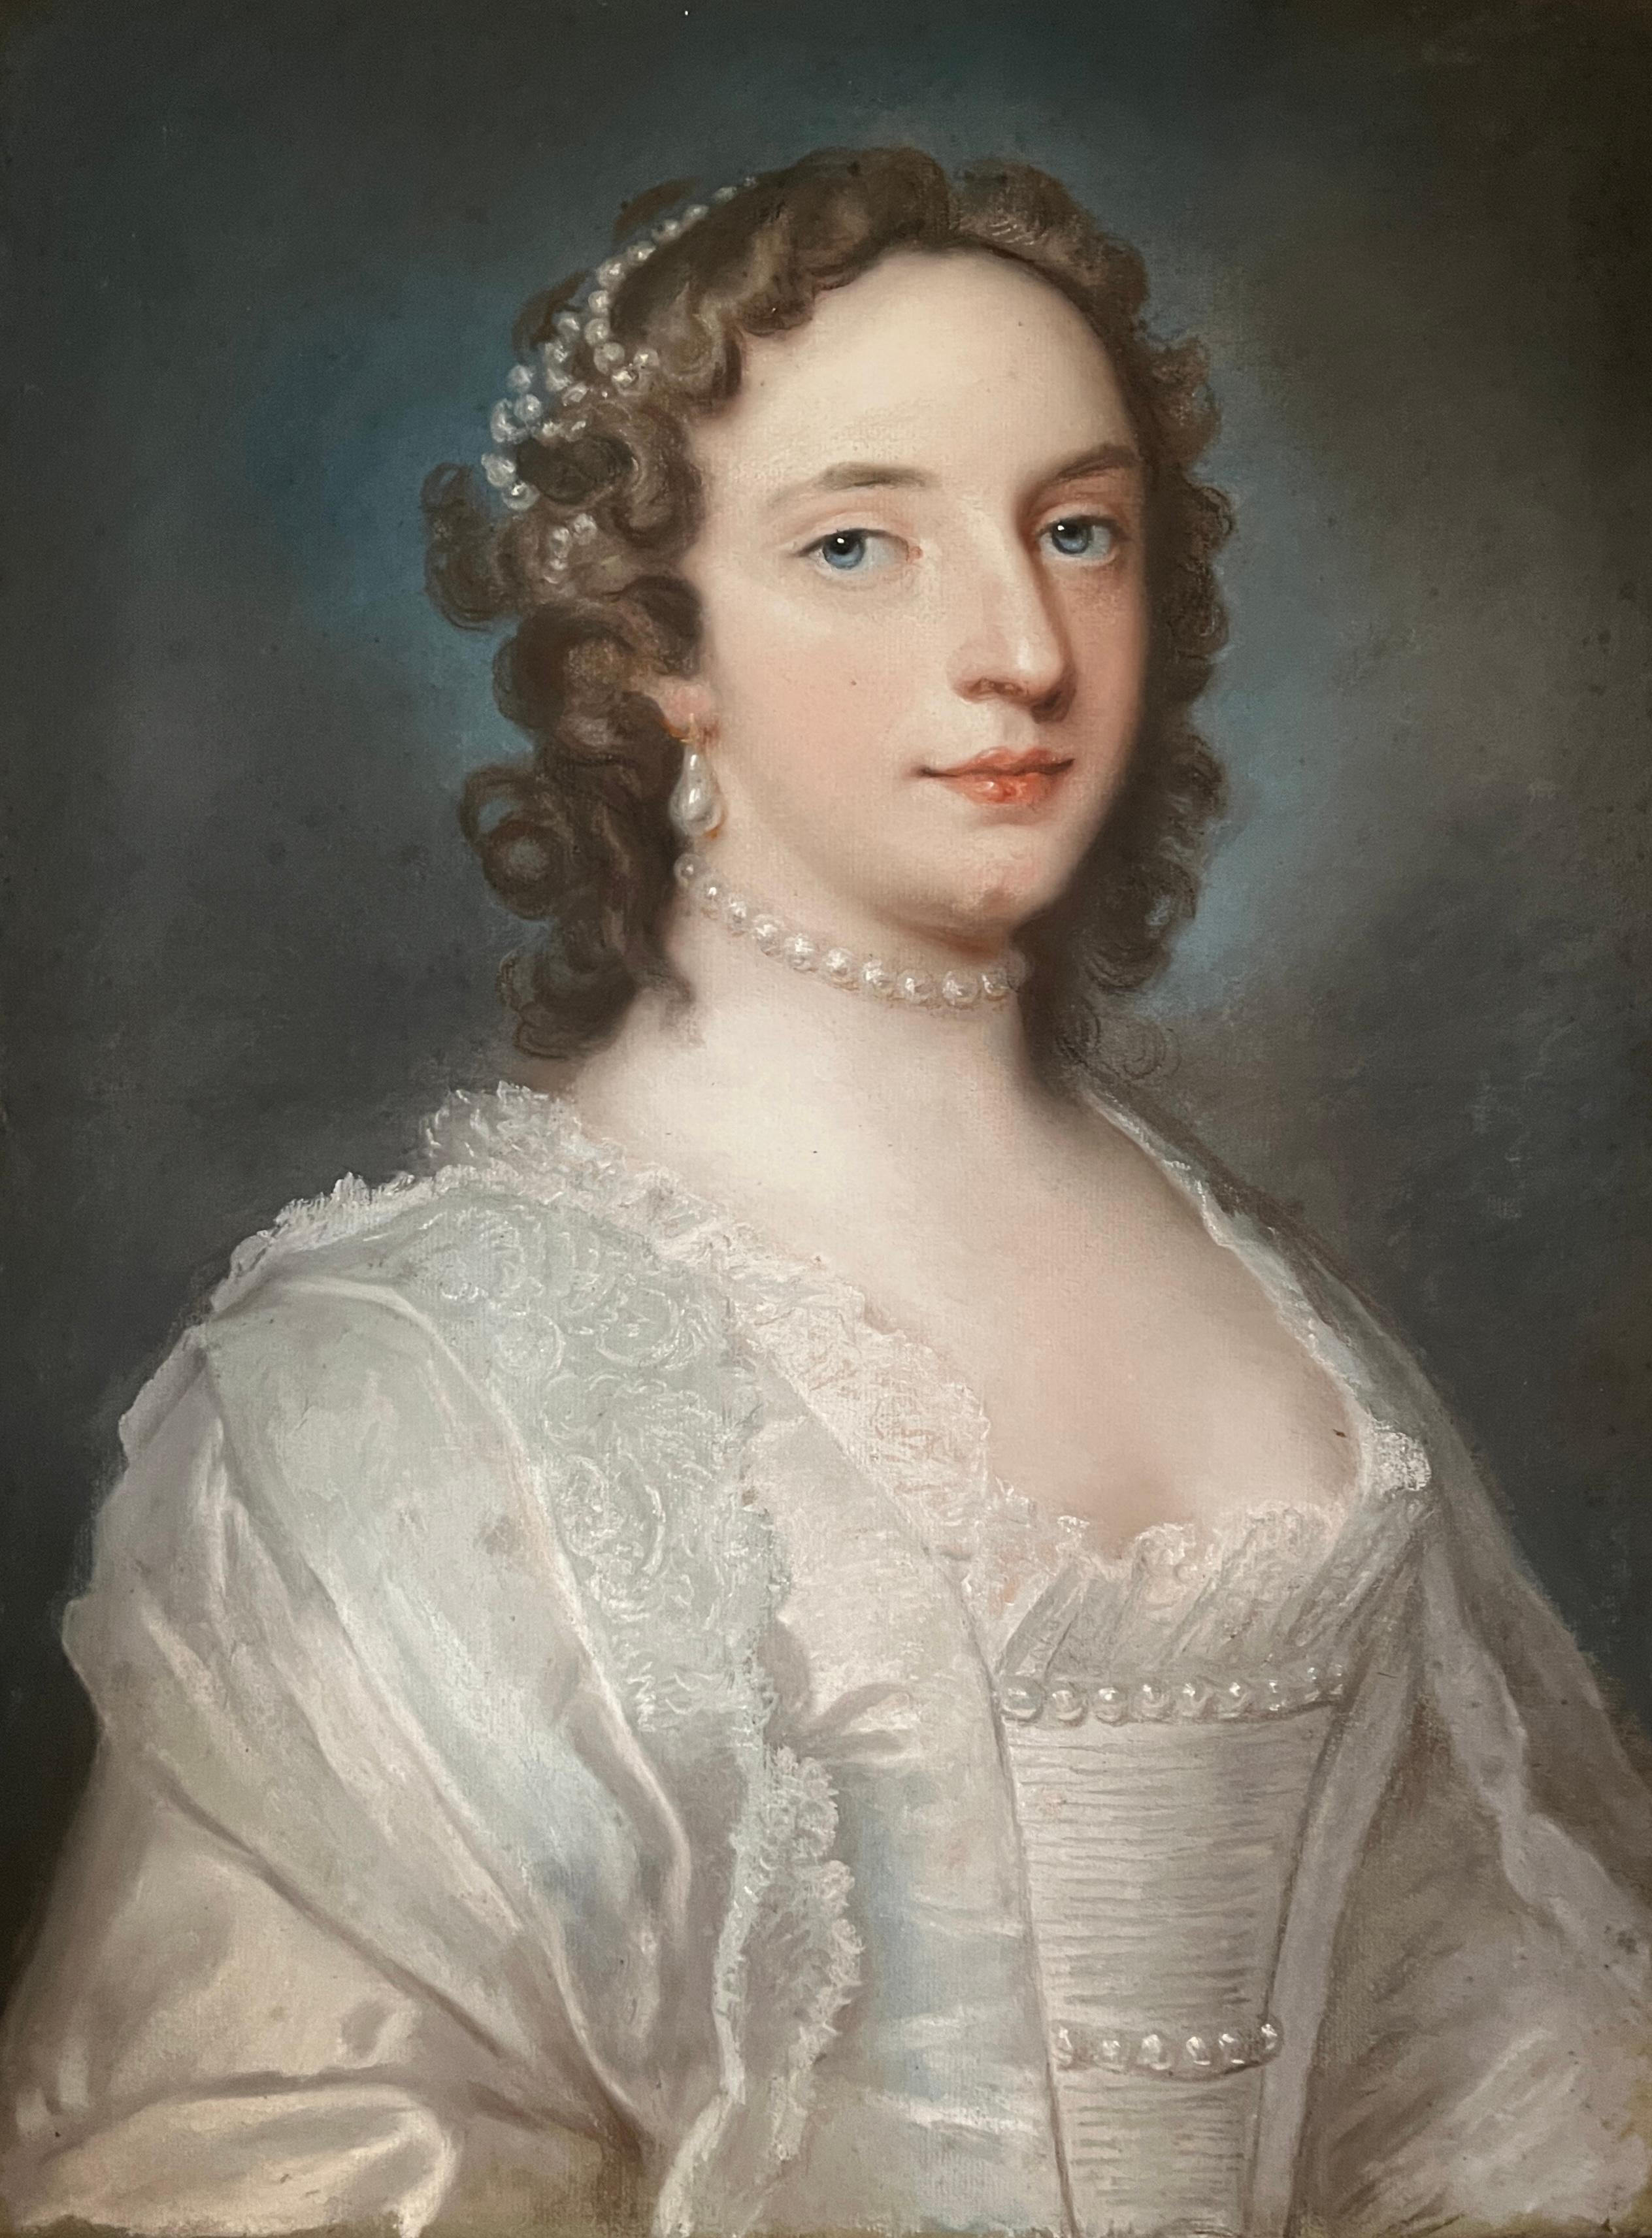 William Hoare Portrait - PORTRAIT OF A LADY IN PEARLS